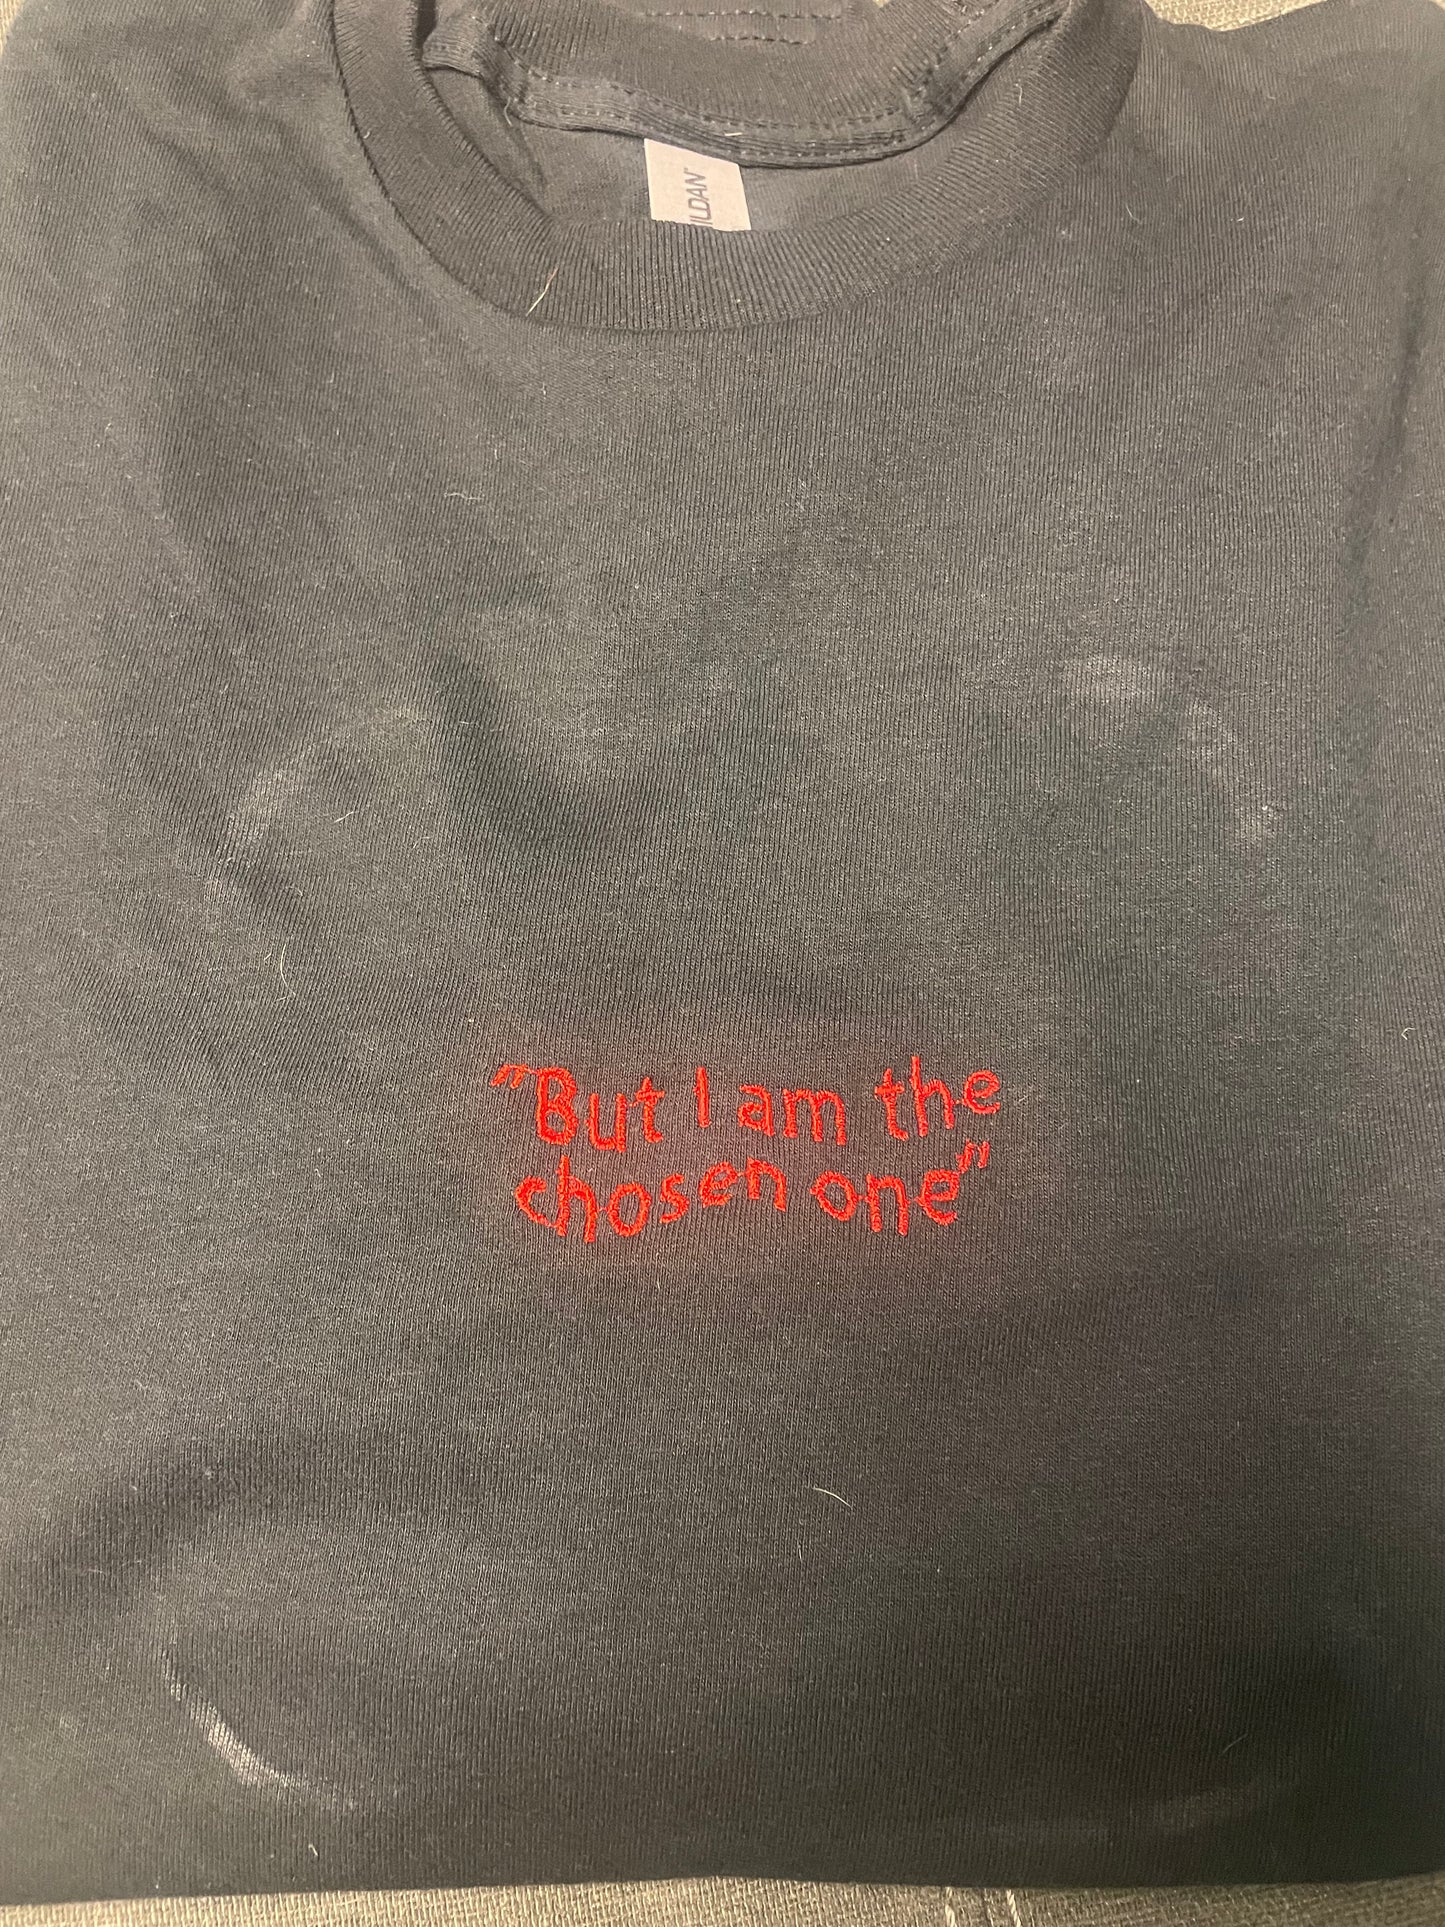 "But I am the chosen one" embroidery shirt